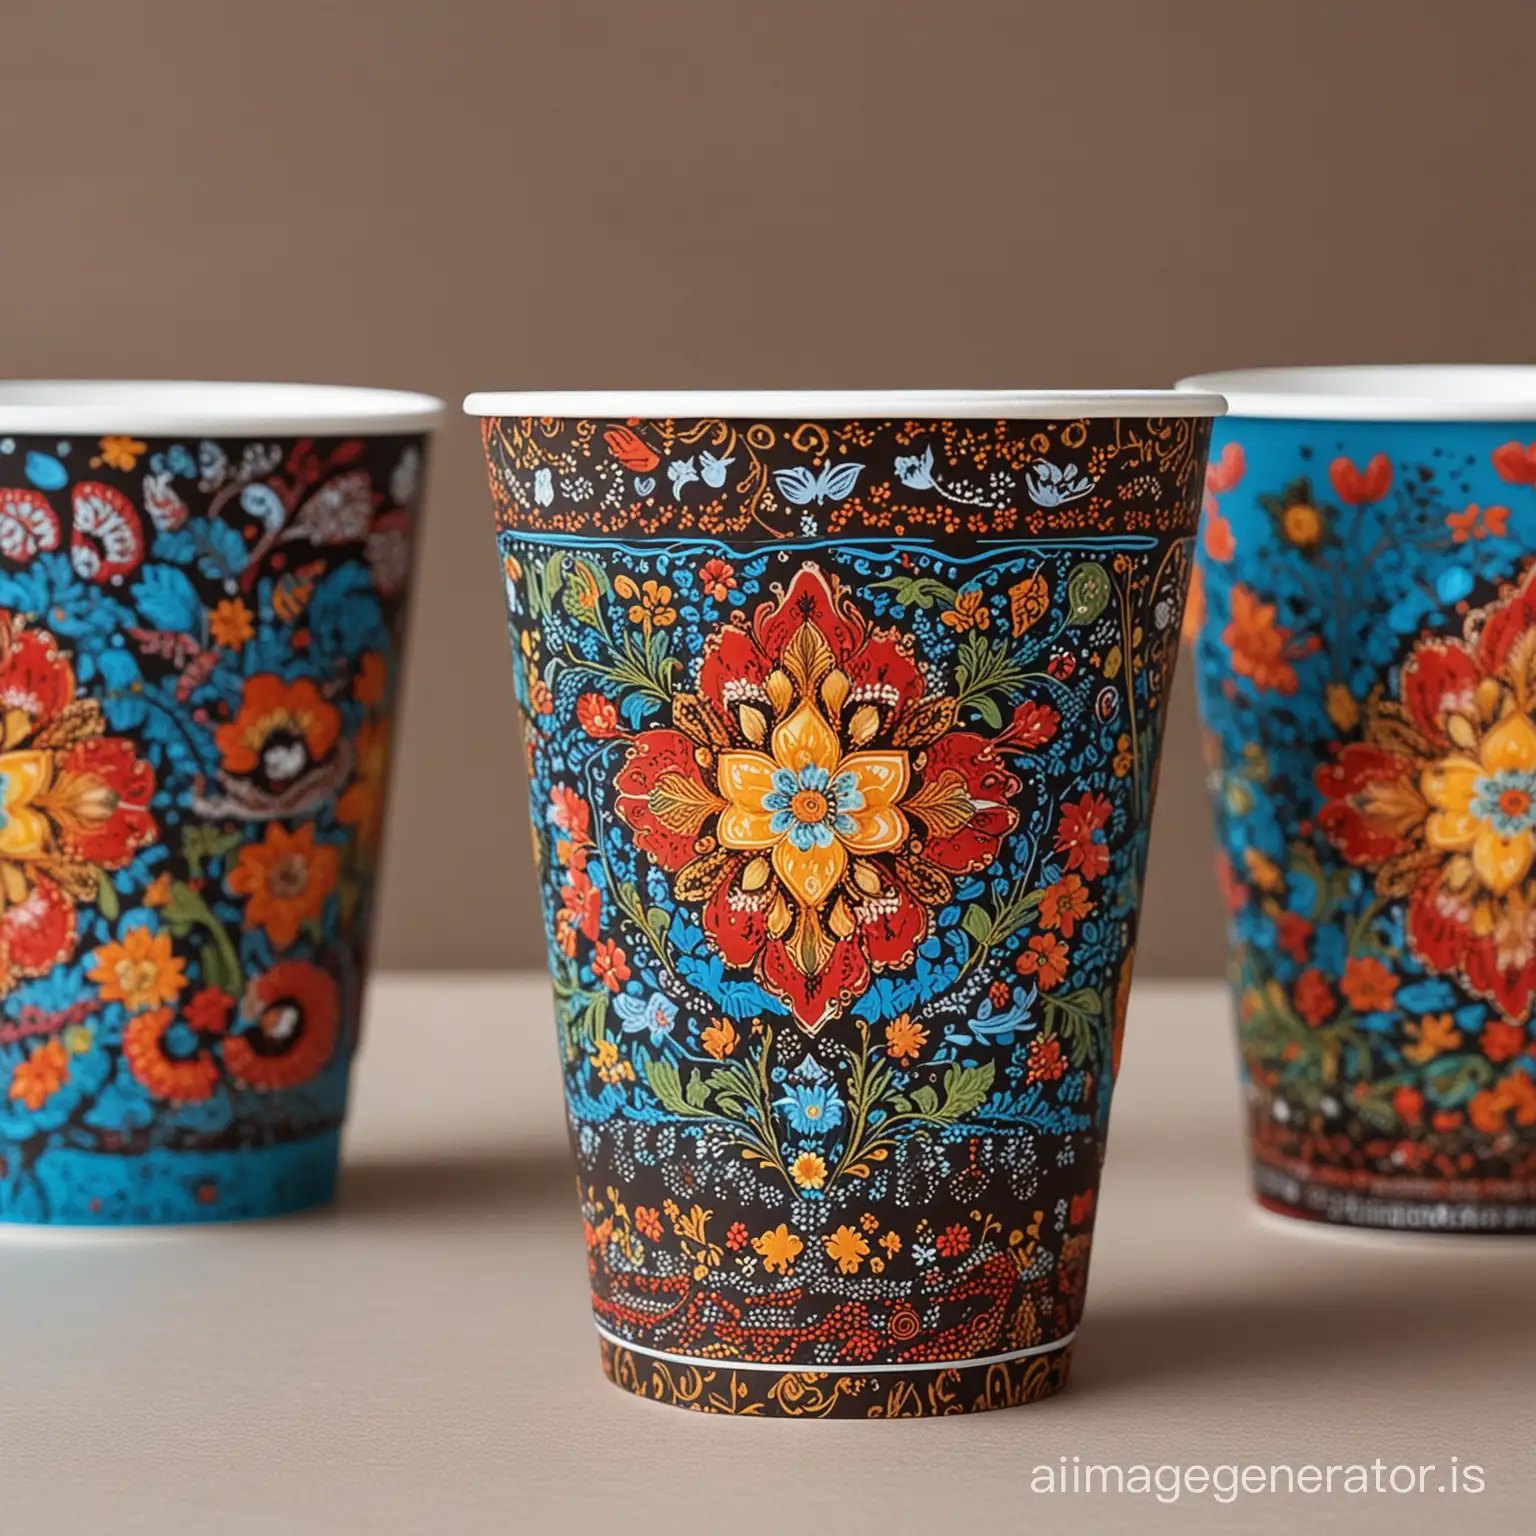 Design a coffee paper cup inspired by Russian folk art, incorporating elements such as traditional motifs, intricate patterns, and vibrant colors to capture the essence of Russian culture and heritage.